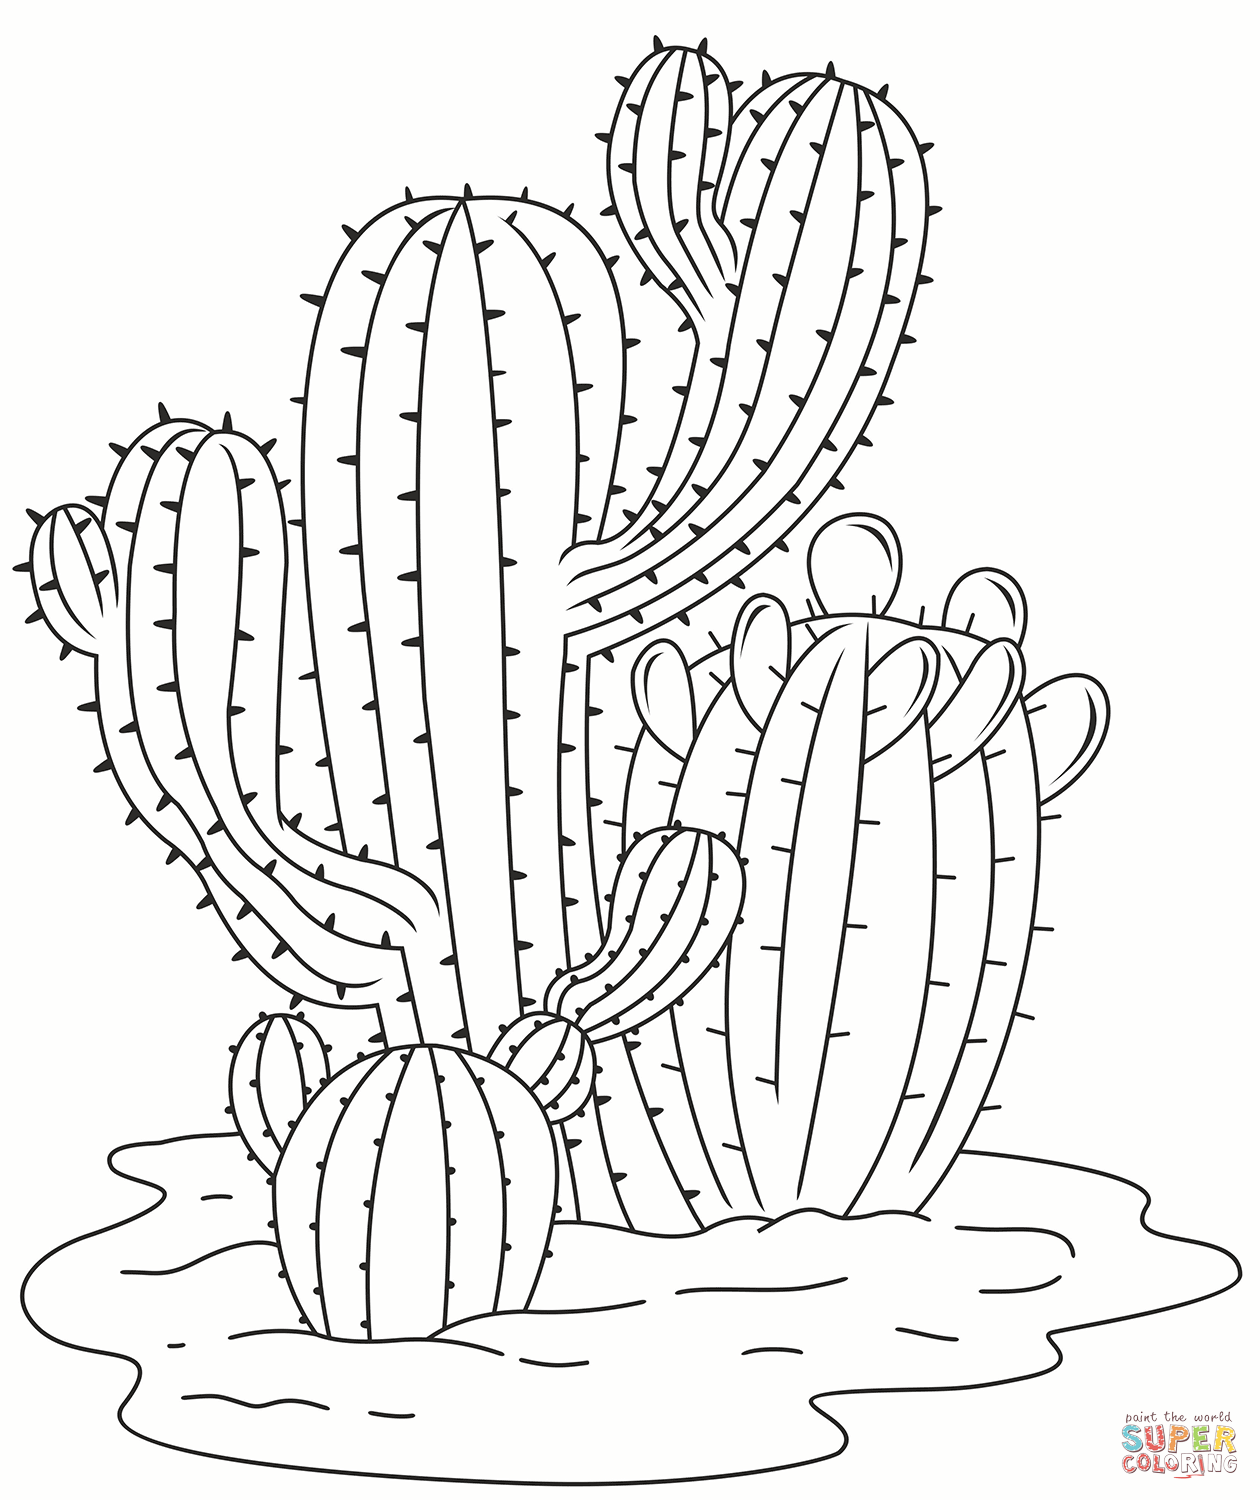 Cactus Coloring Pages   Cactus Coloring Pages   Coloring Pages For ...